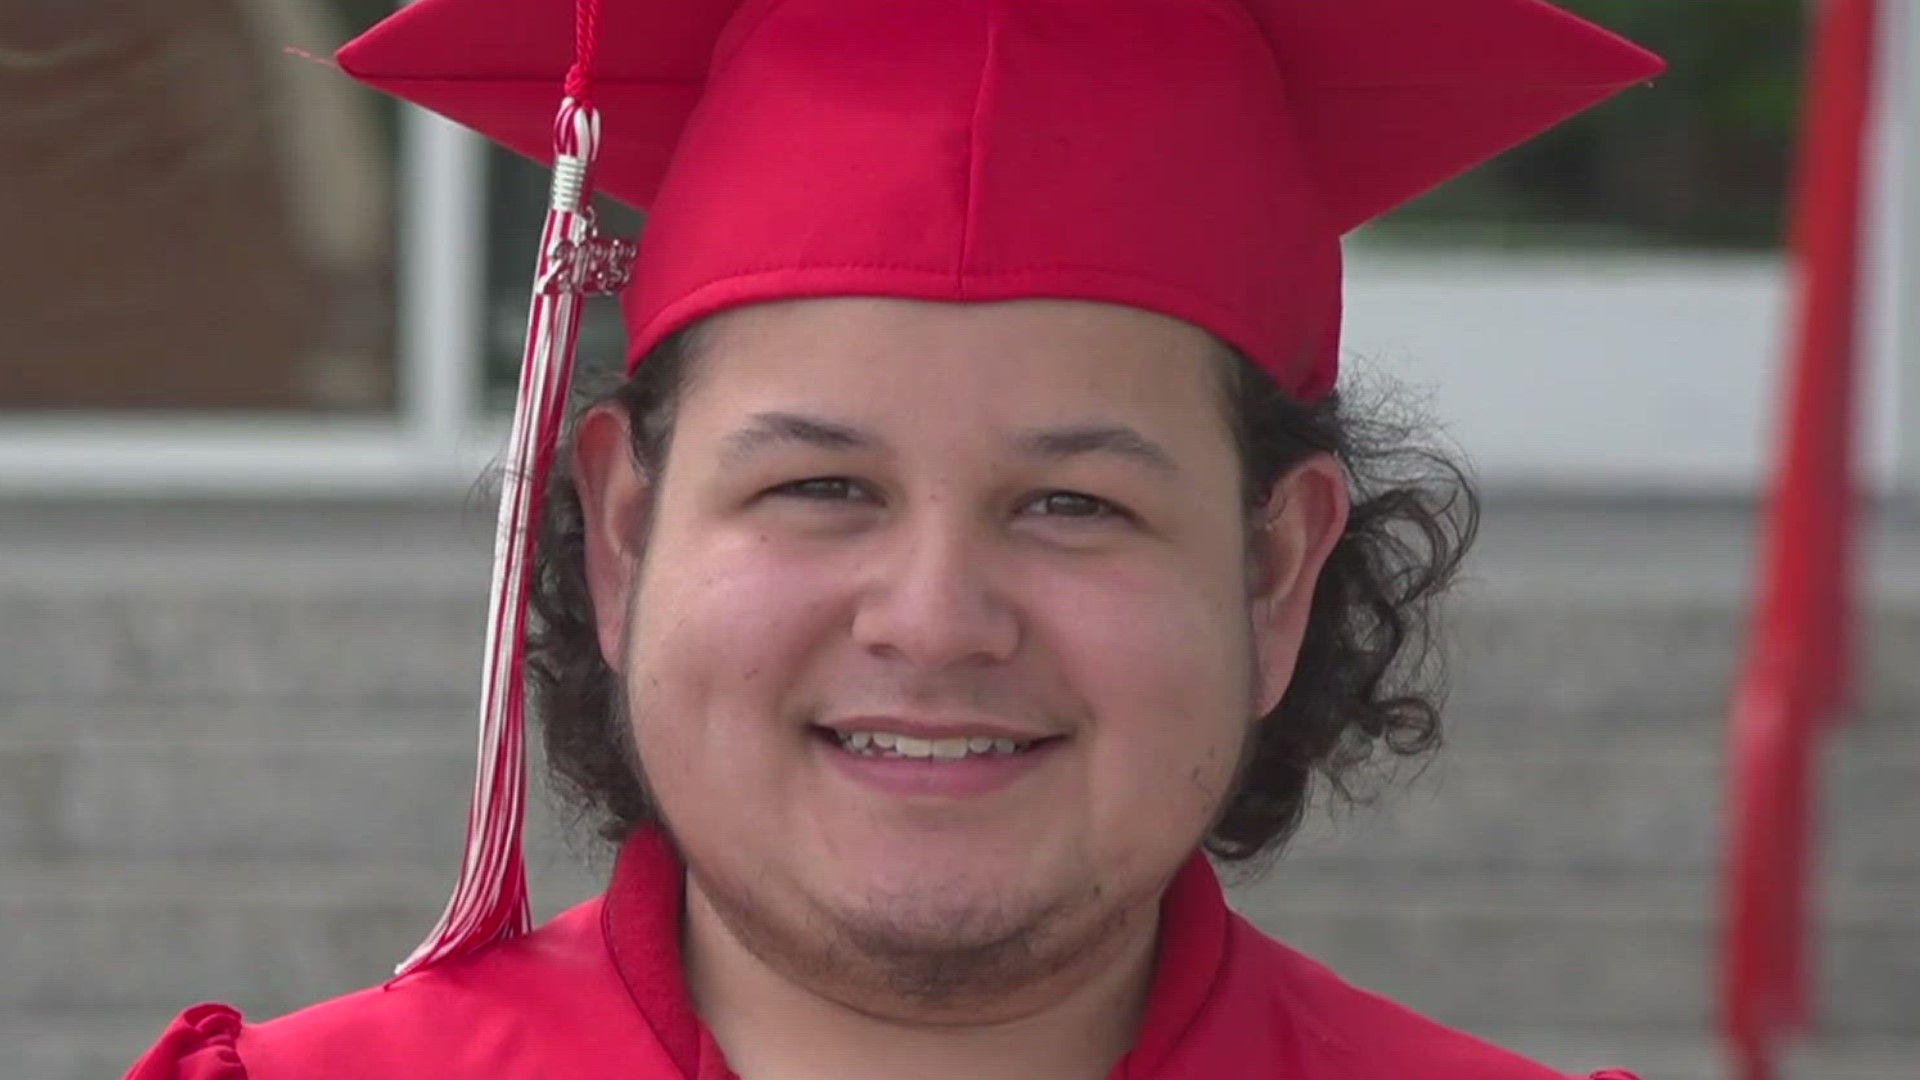 Jace Sandoval was diagnosed with brain cancer as a baby. But Friday, he will graduate from Ray High School with his eyes set on college, and a clean bill of health.